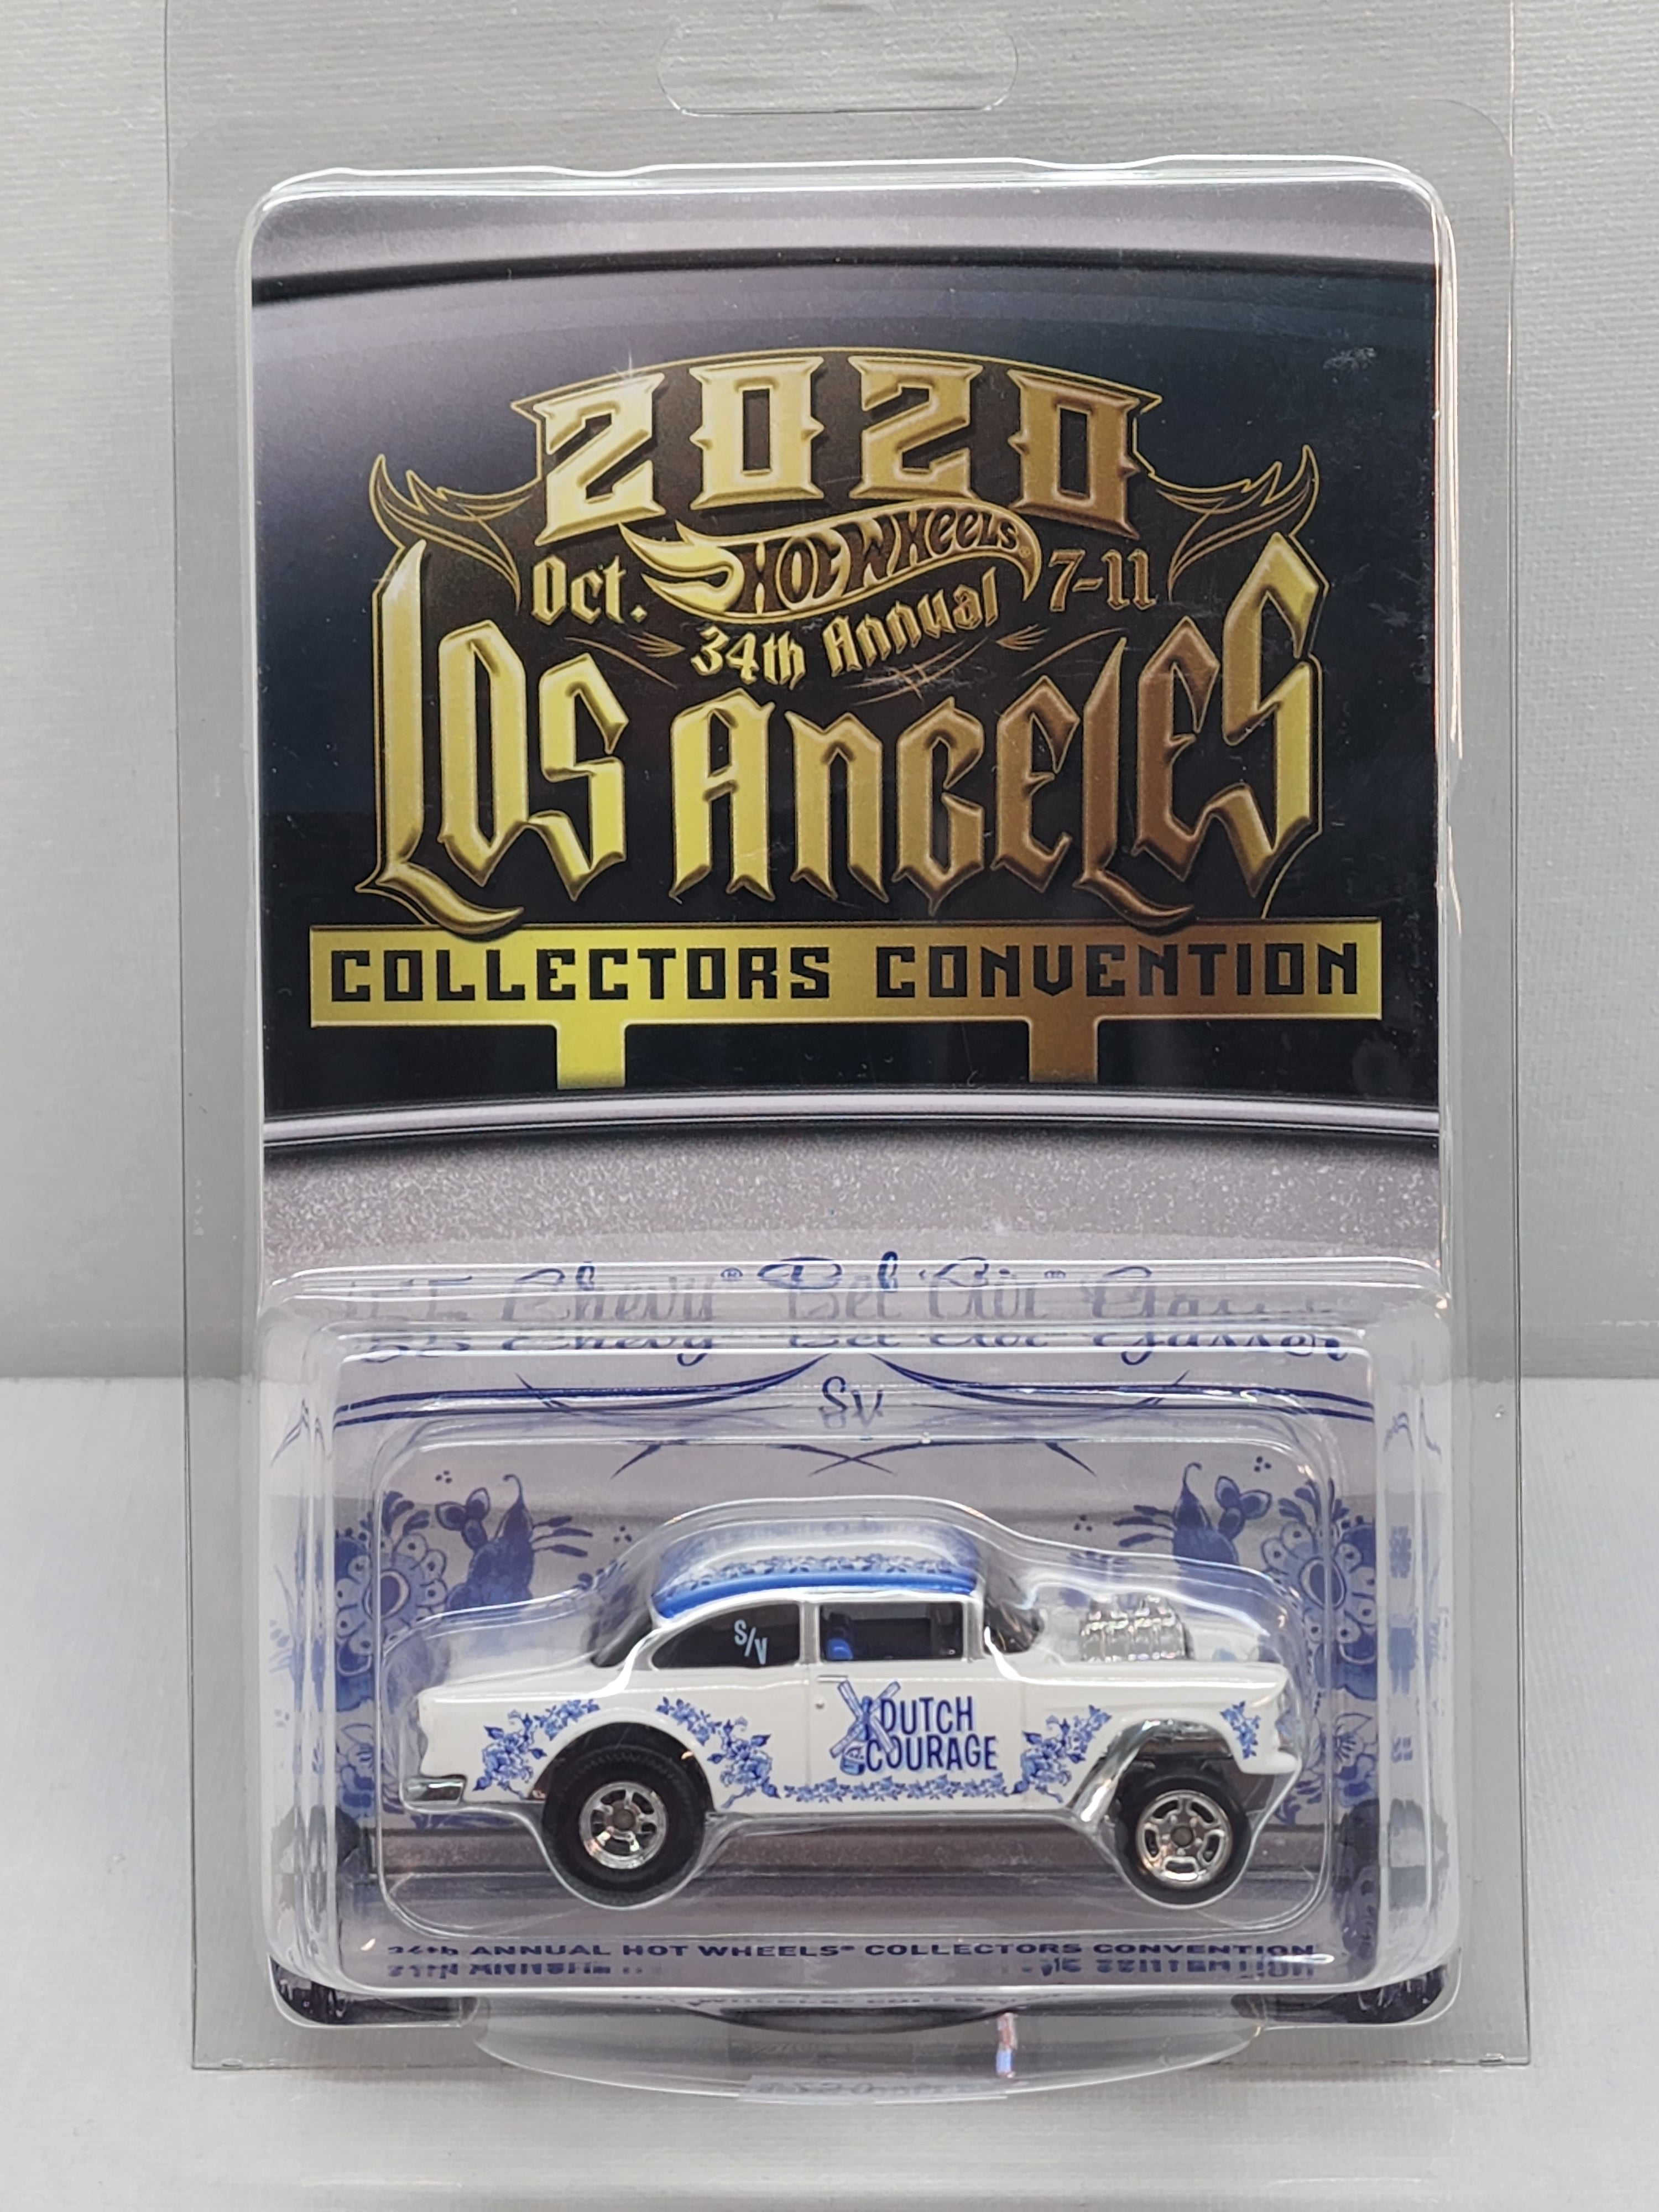 Hot wheel 2020 La convention 55 chevy bel air gasser – Chase